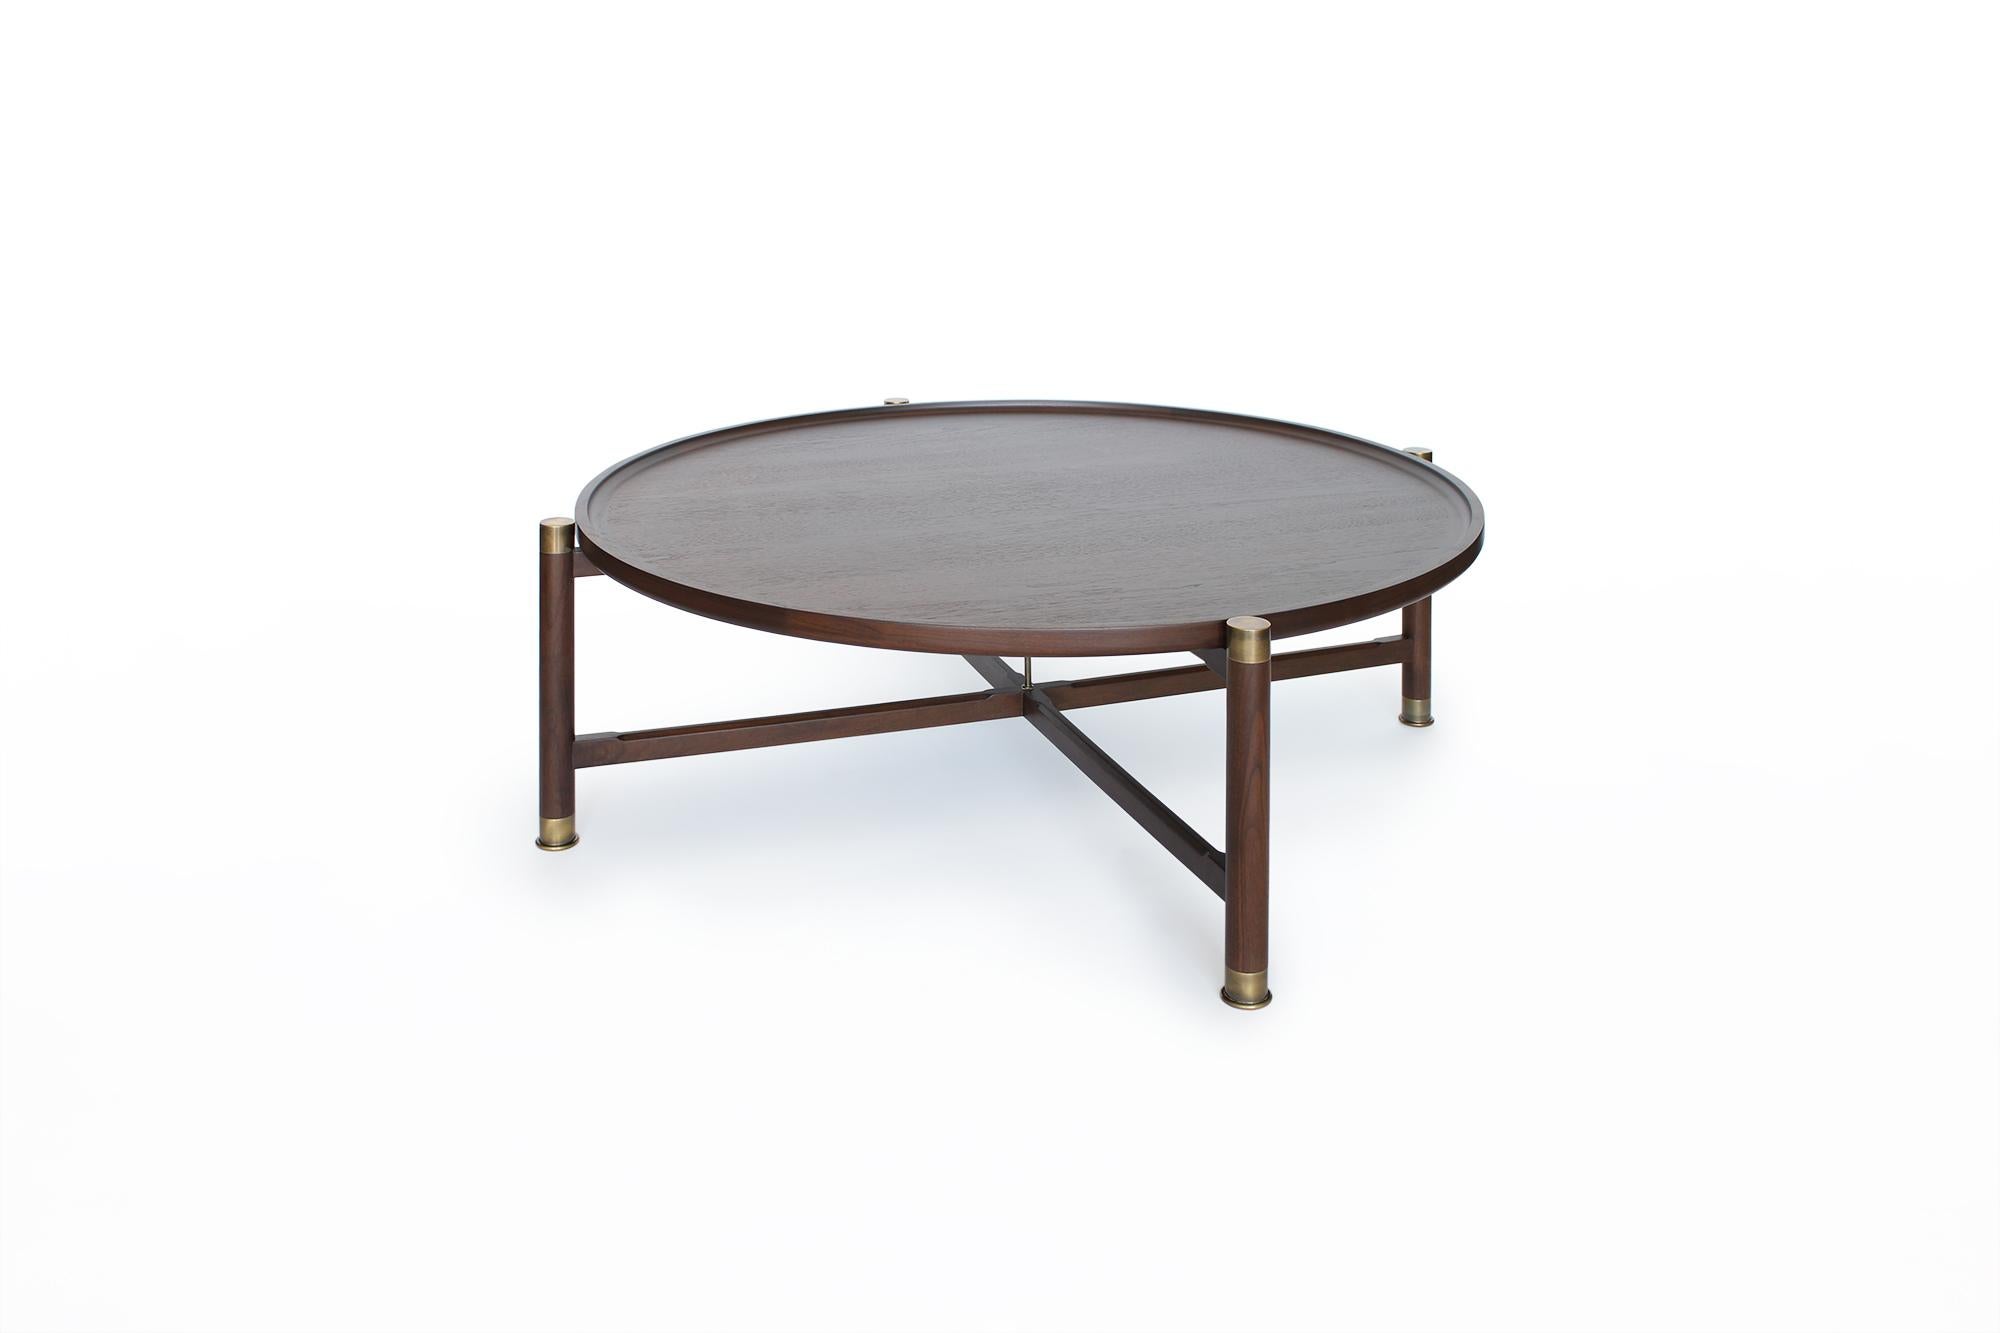 Modern Otto Round Coffee Table in Light Walnut with Antique Brass Fittings and Stem For Sale